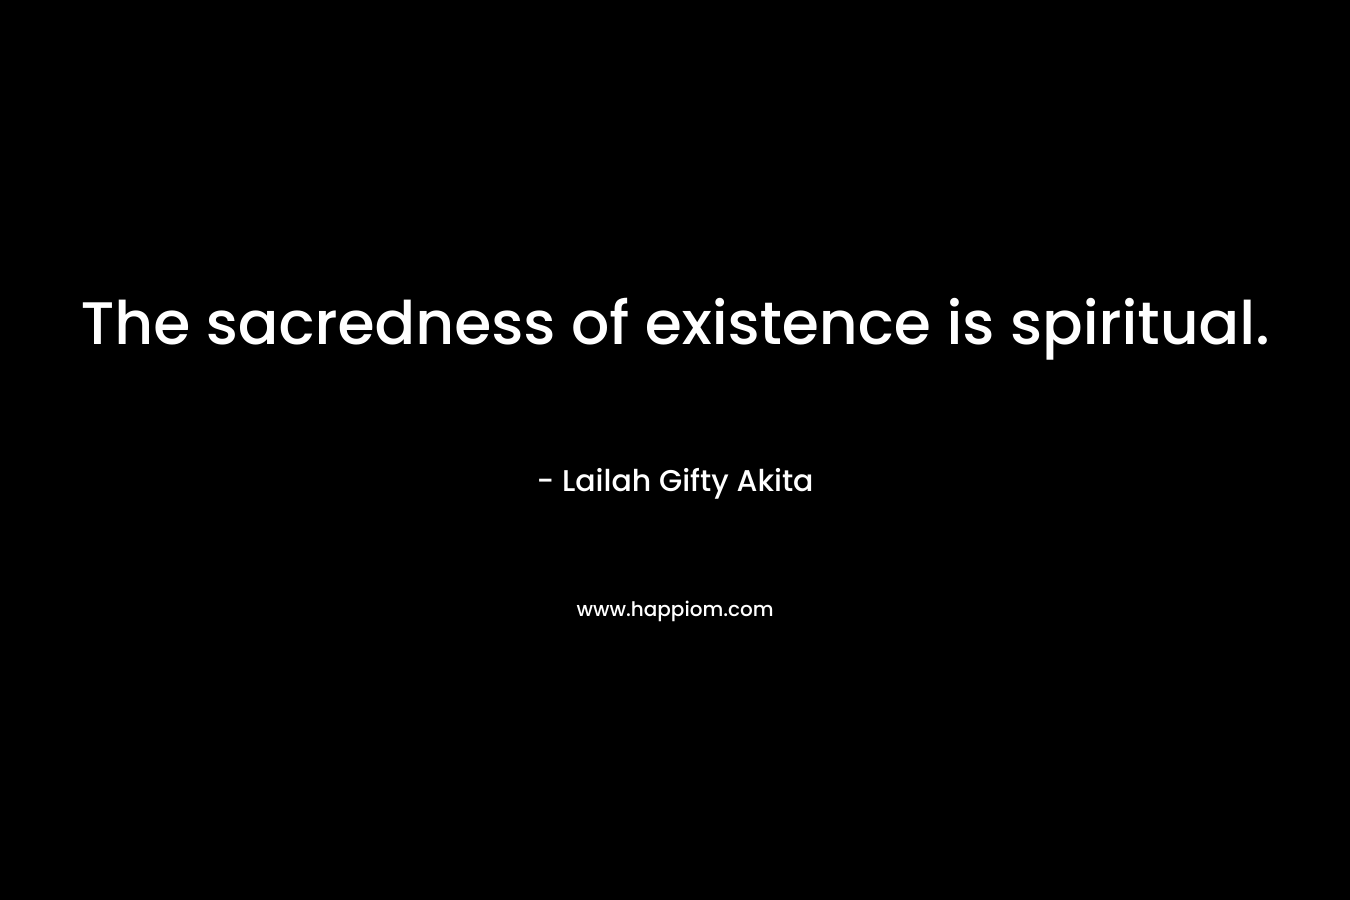 The sacredness of existence is spiritual.